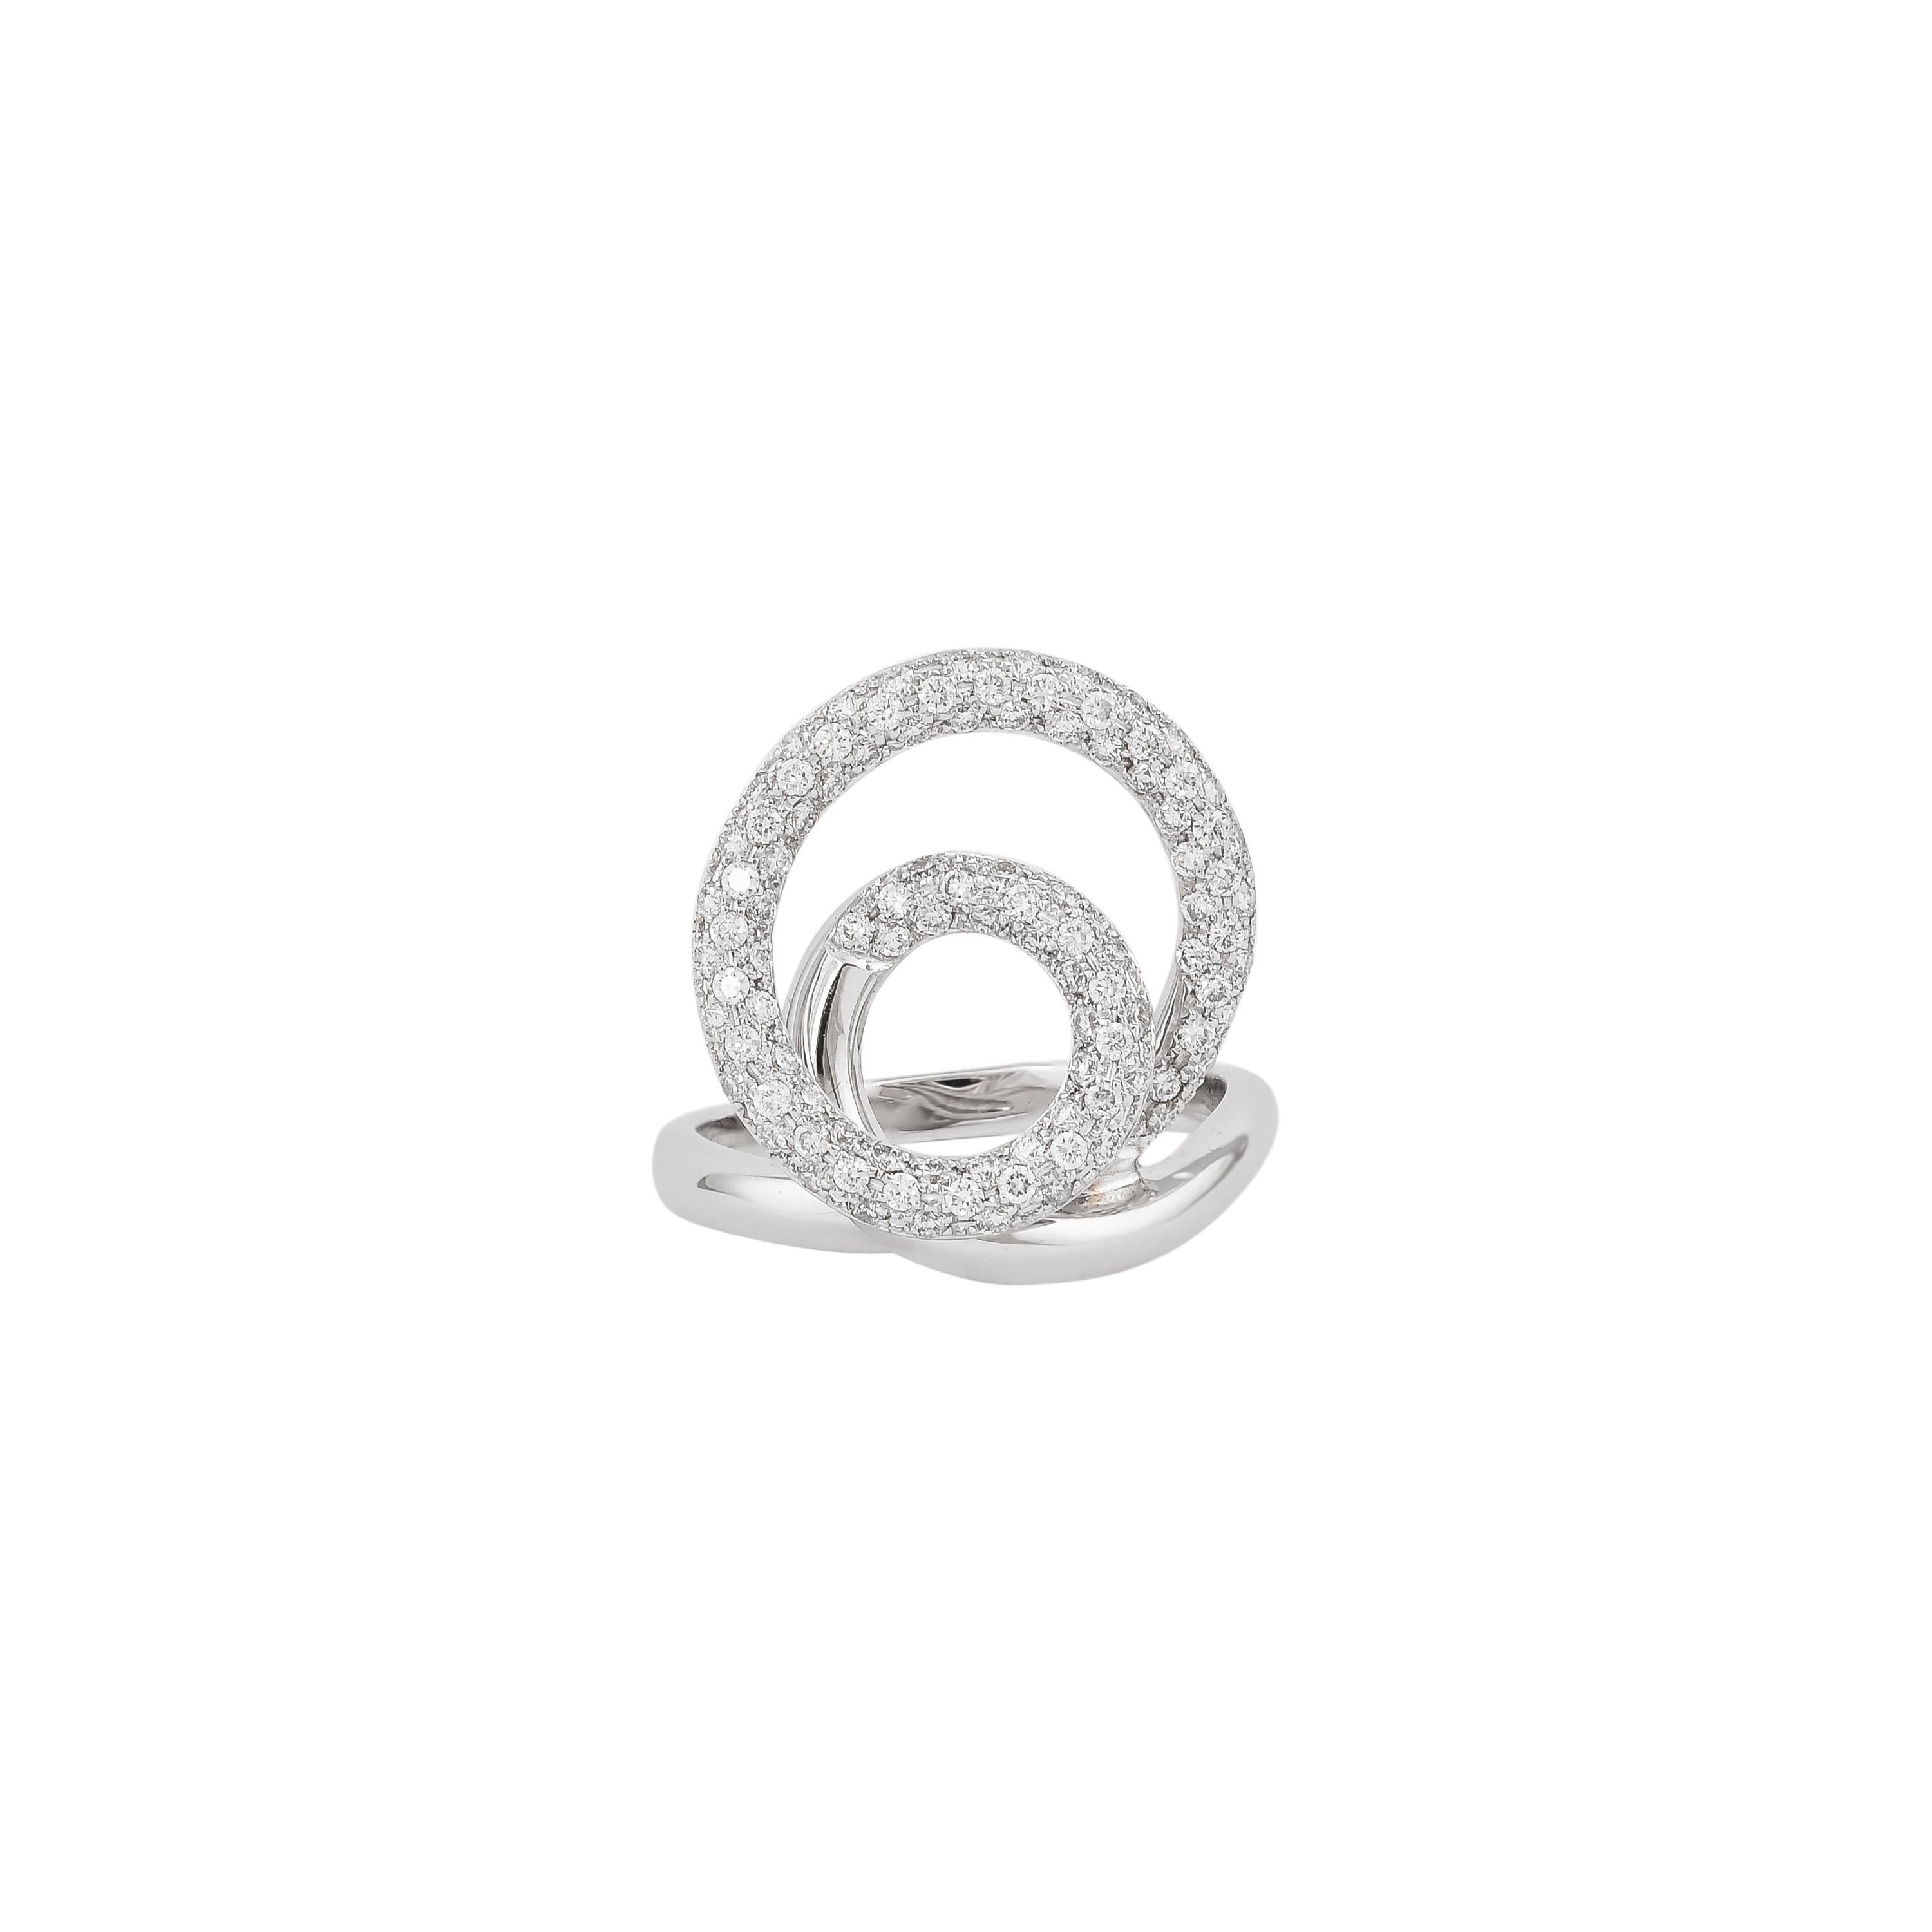 Contemporary 0.824 Carat Diamond Ring in 18 Karat White Gold For Sale